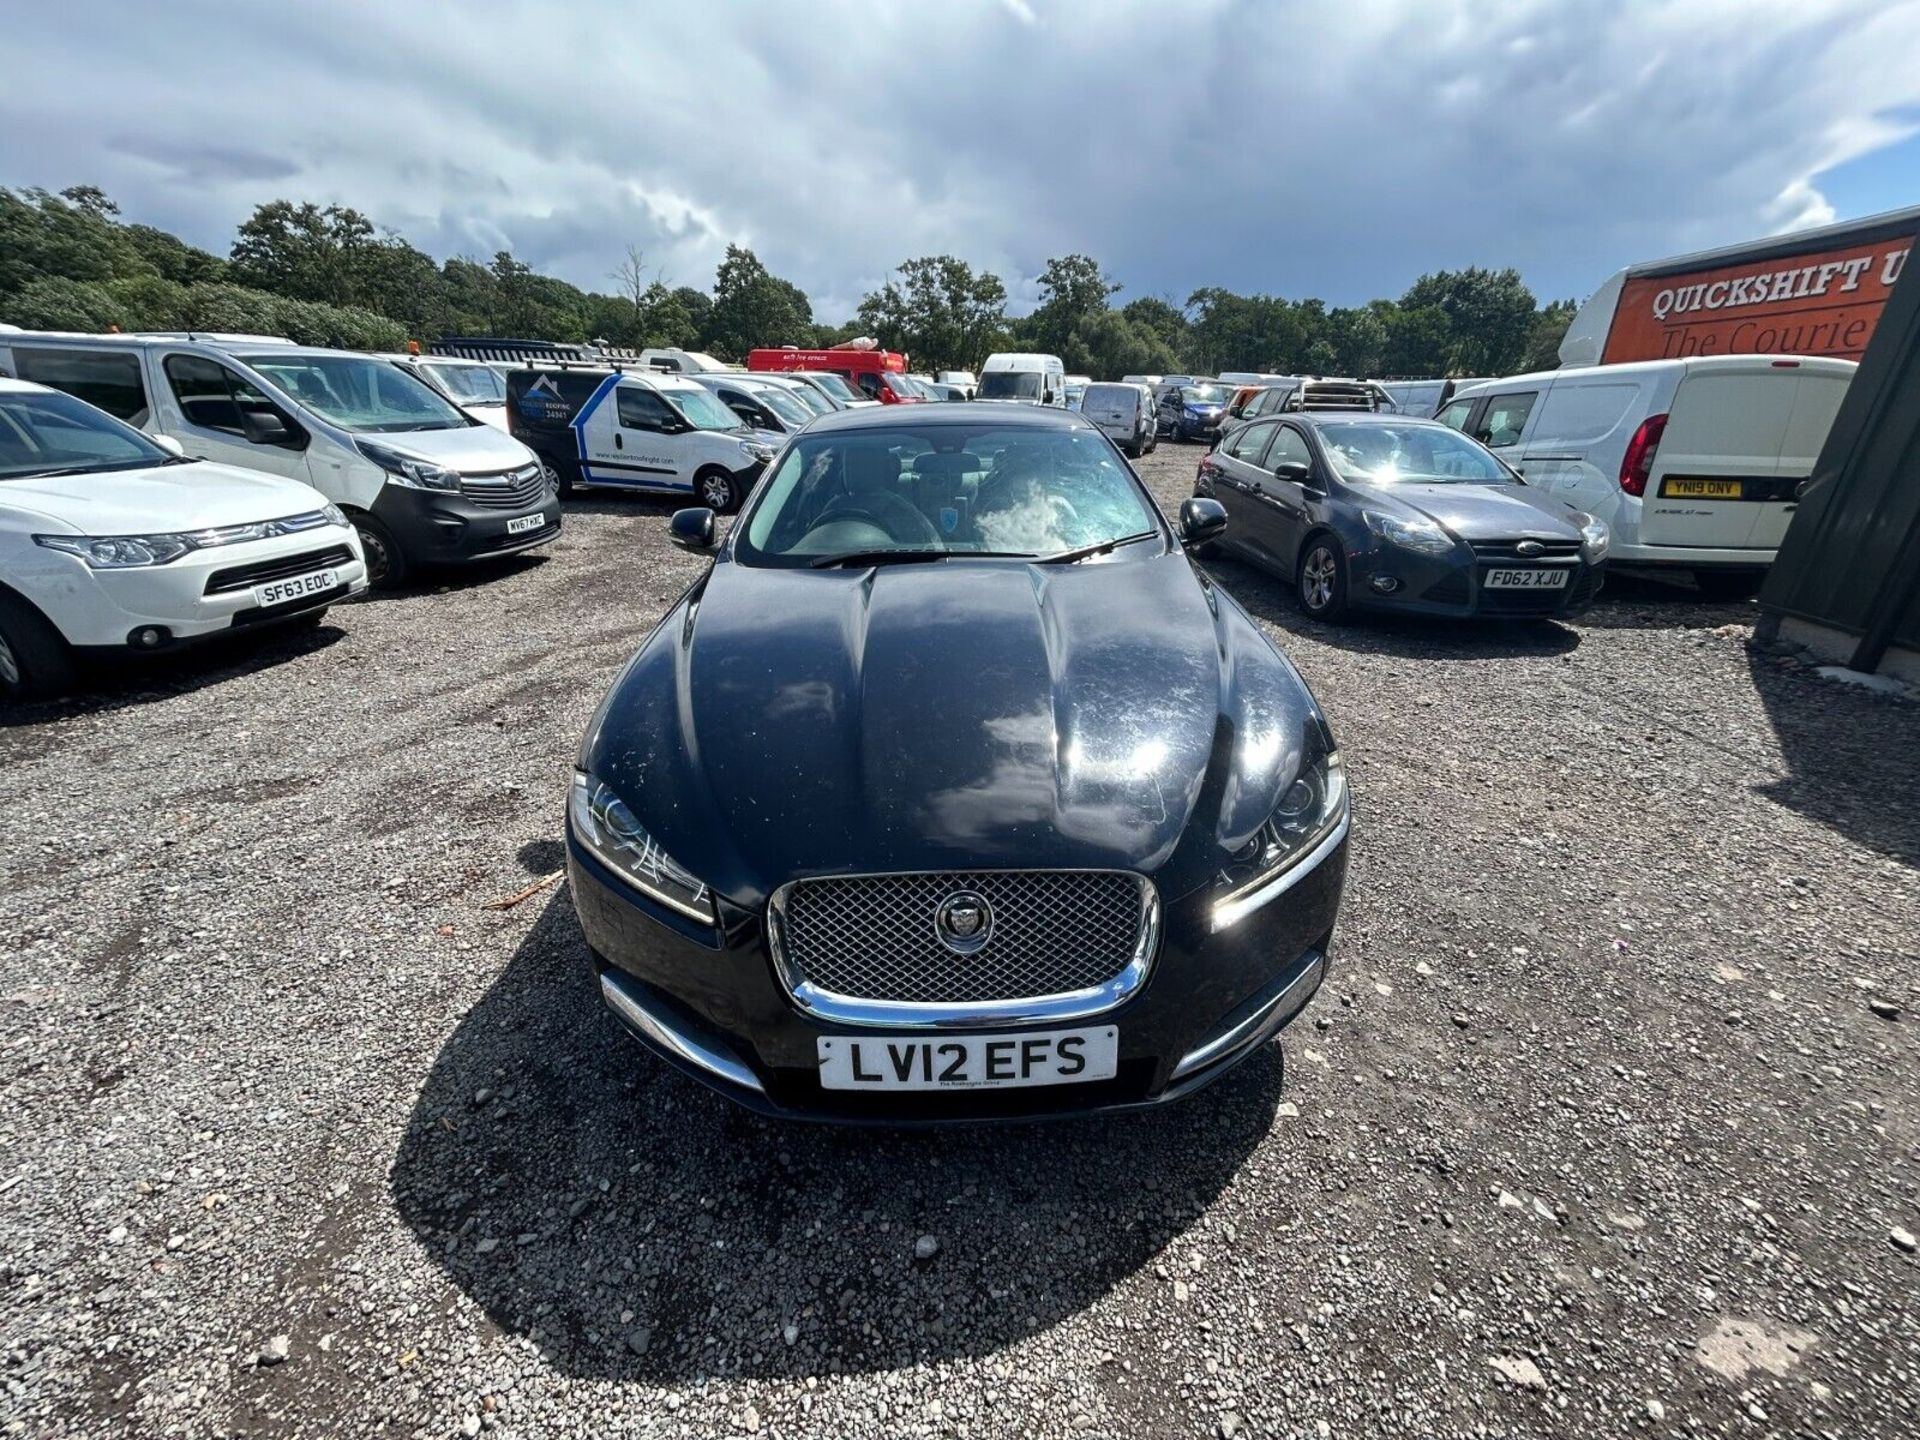 JAGUAR XF DIESEL SALOON 2.2D LUXURY 4DR AUTO 12 MONTHS MOT (NO VAT ON HAMMER) - IN DAILY USE - Image 15 of 19